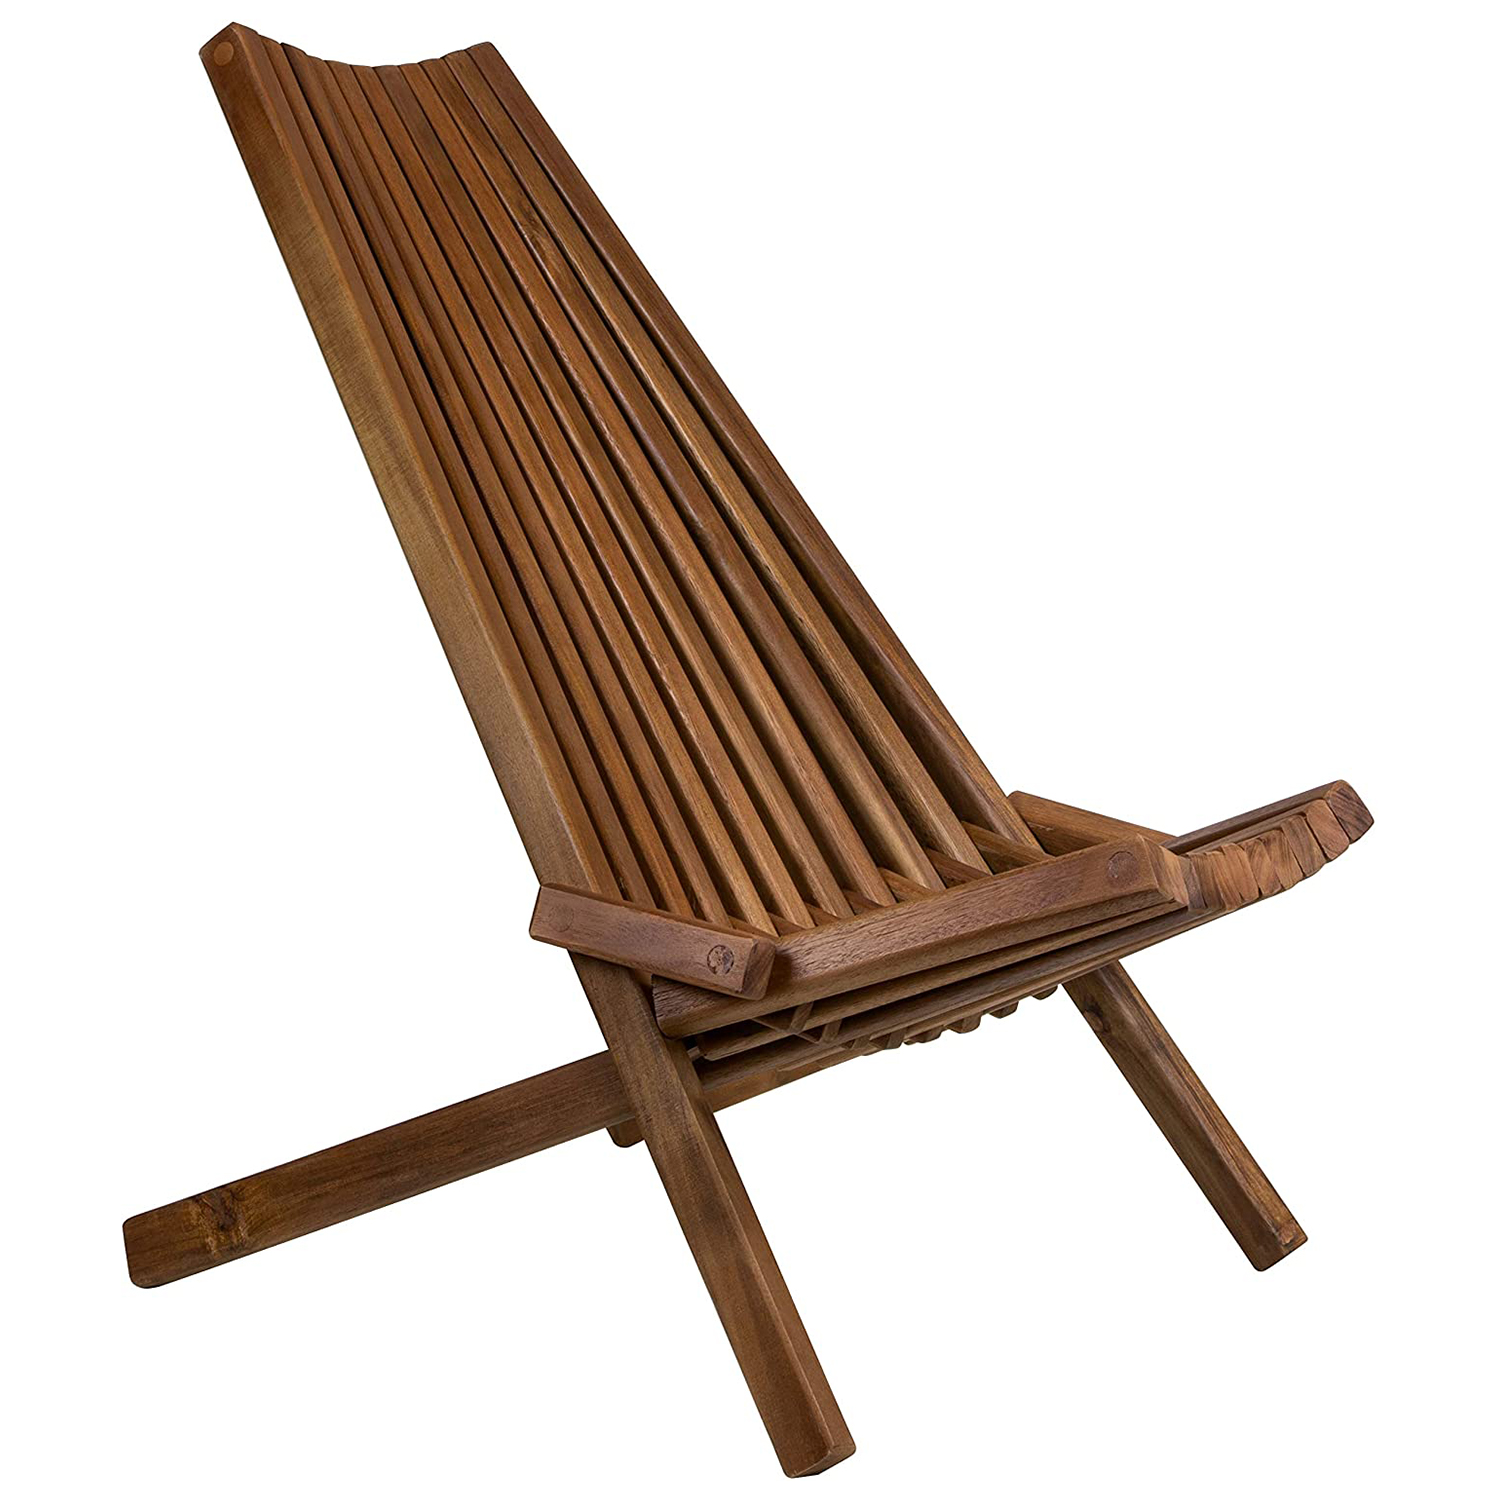 CleverMade Tamarack Low Profile Acacia Wood Lounge Folding Wooden